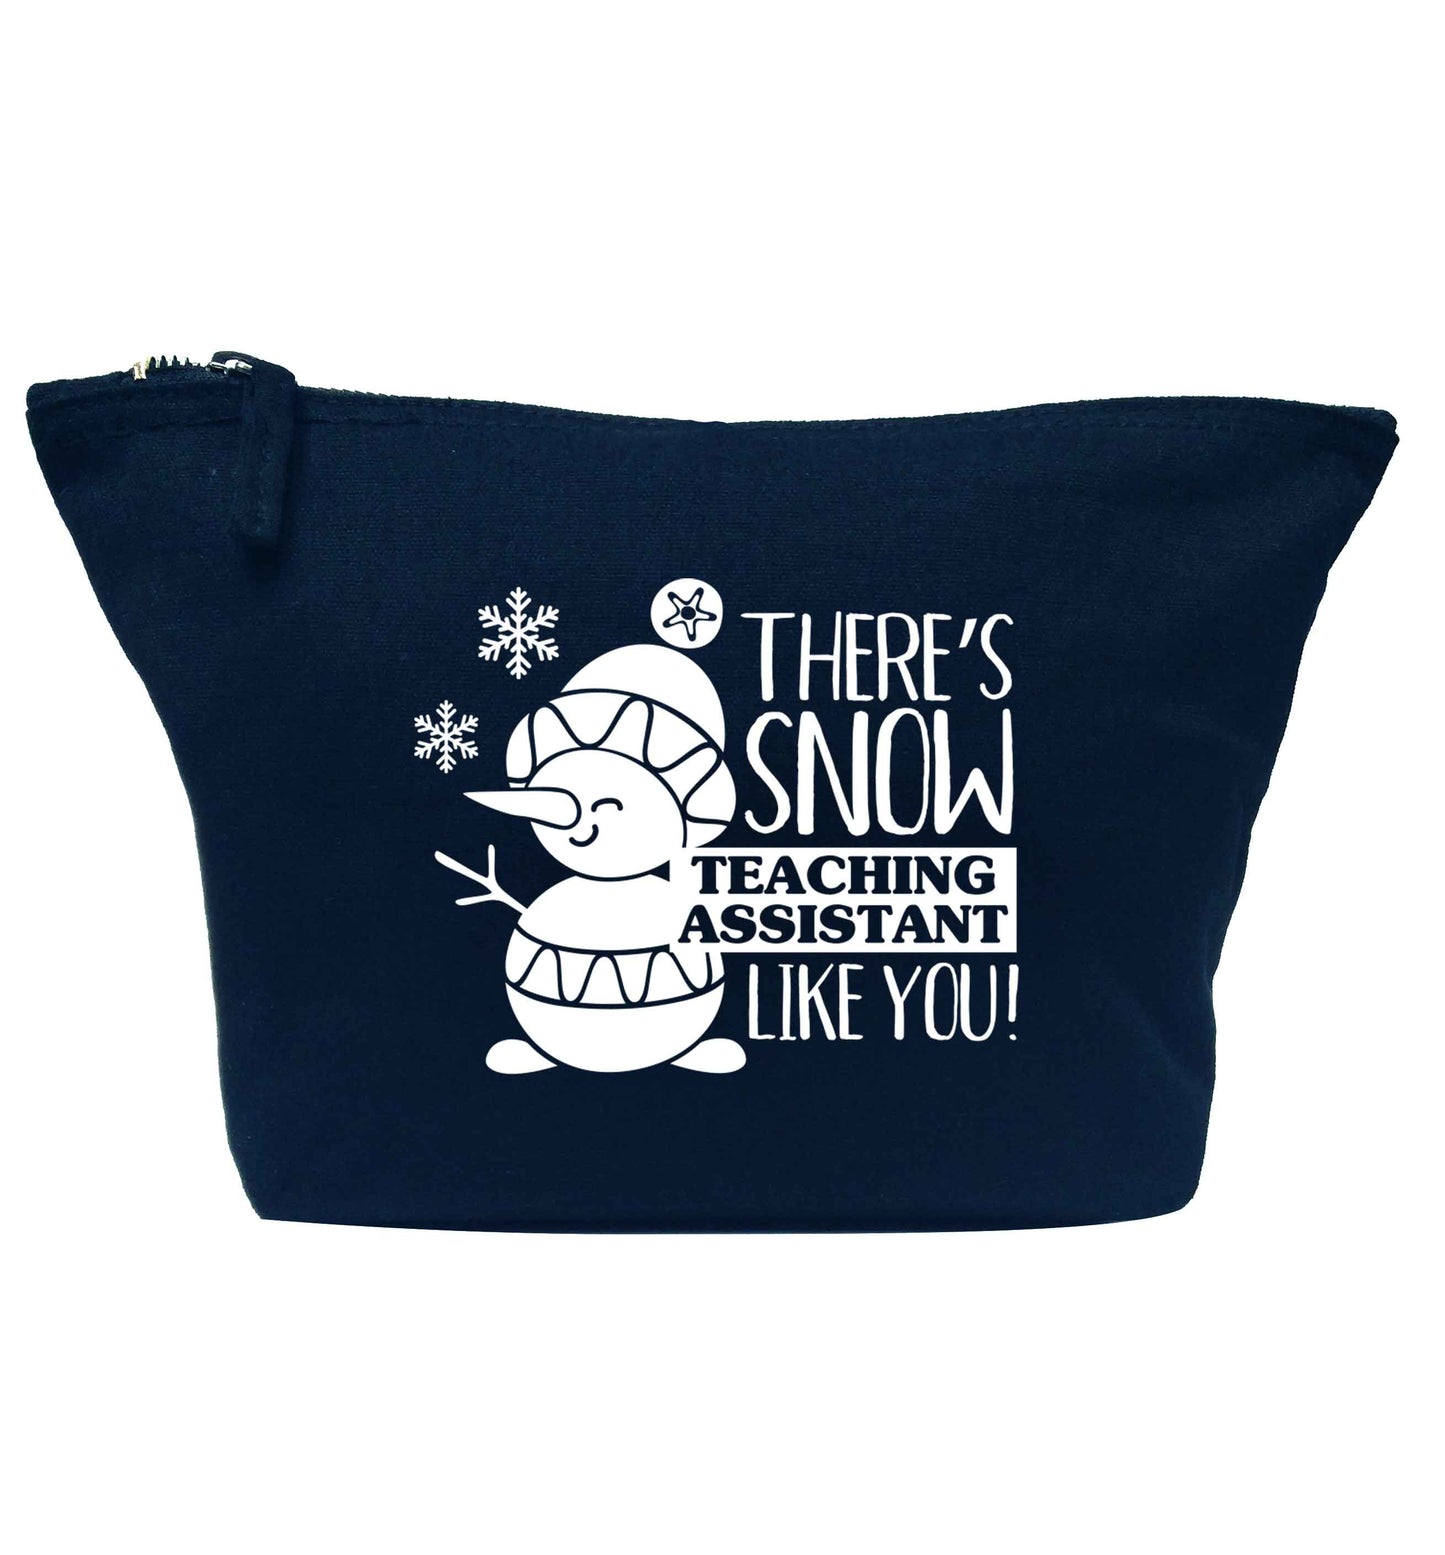 There's snow teaching assistant like you navy makeup bag